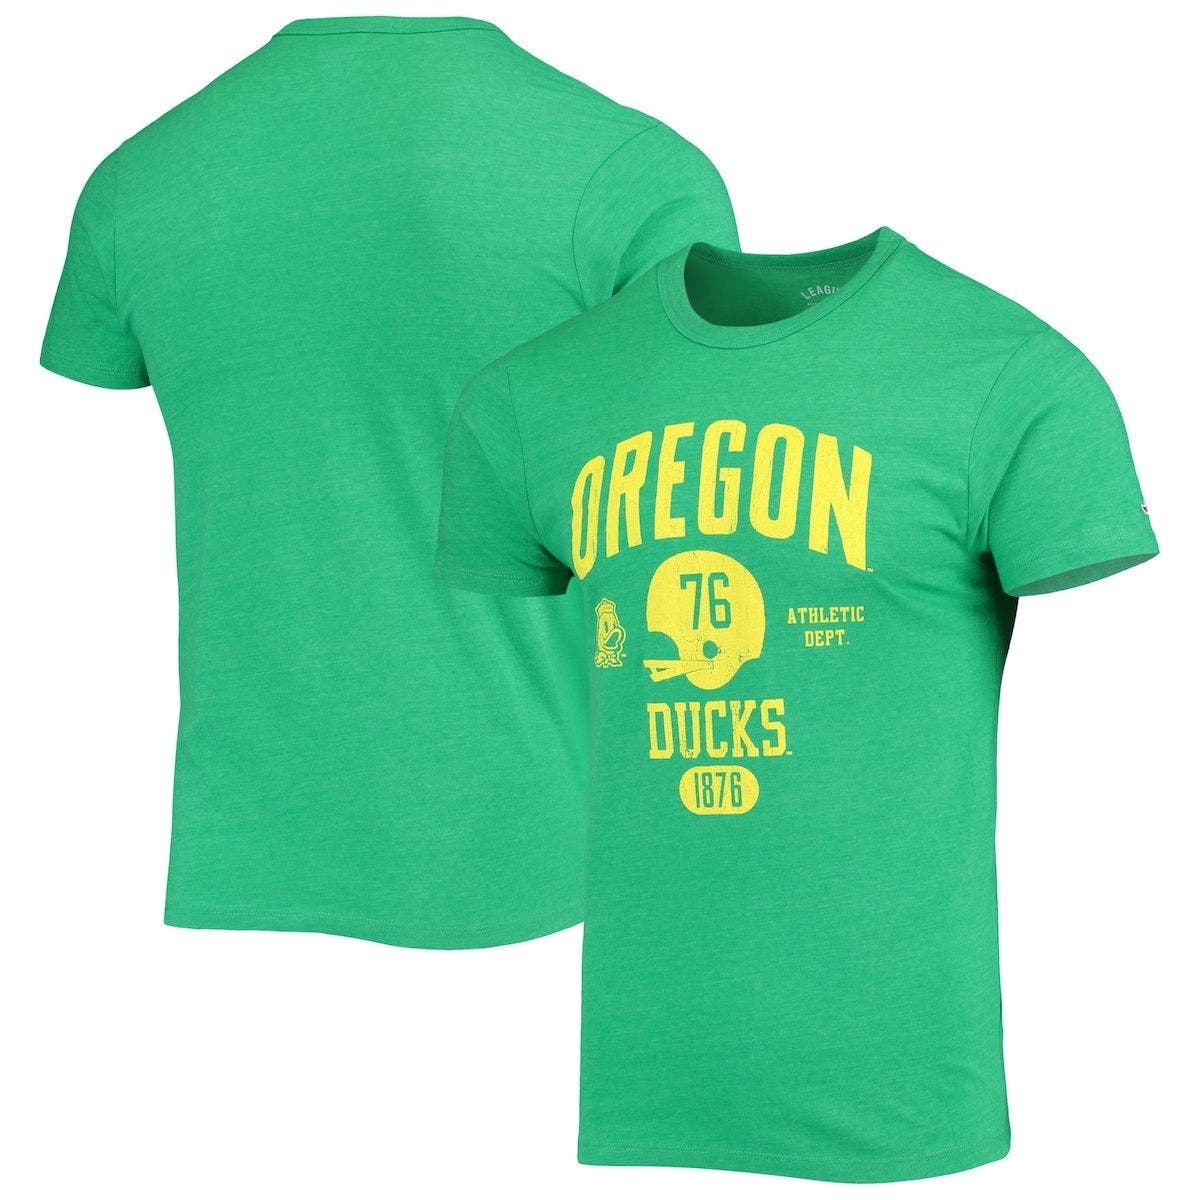 NCAA Licensed University of Oregon Ducks Toddler Shirt & Pants Outfit Set New 4T 